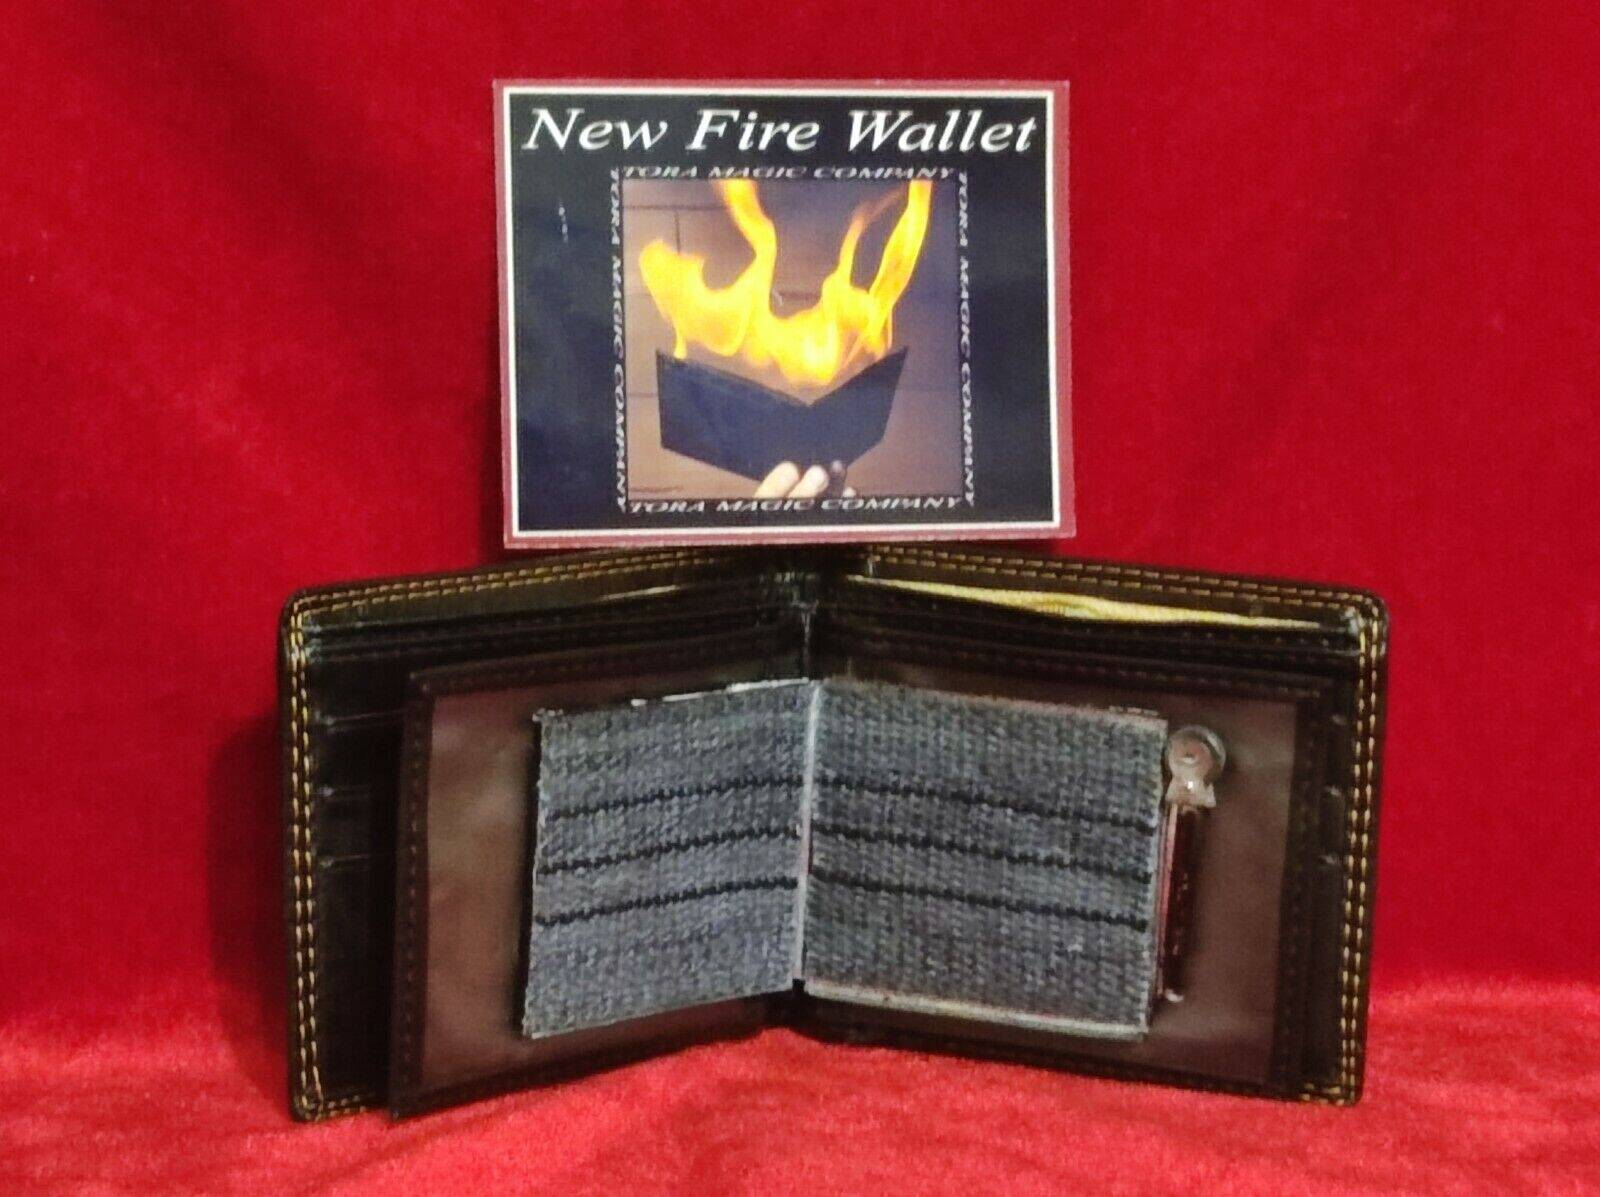 New Fire Wallet by Tora Magic on red background shown closed next to photograph of wallet in action showing gimmick